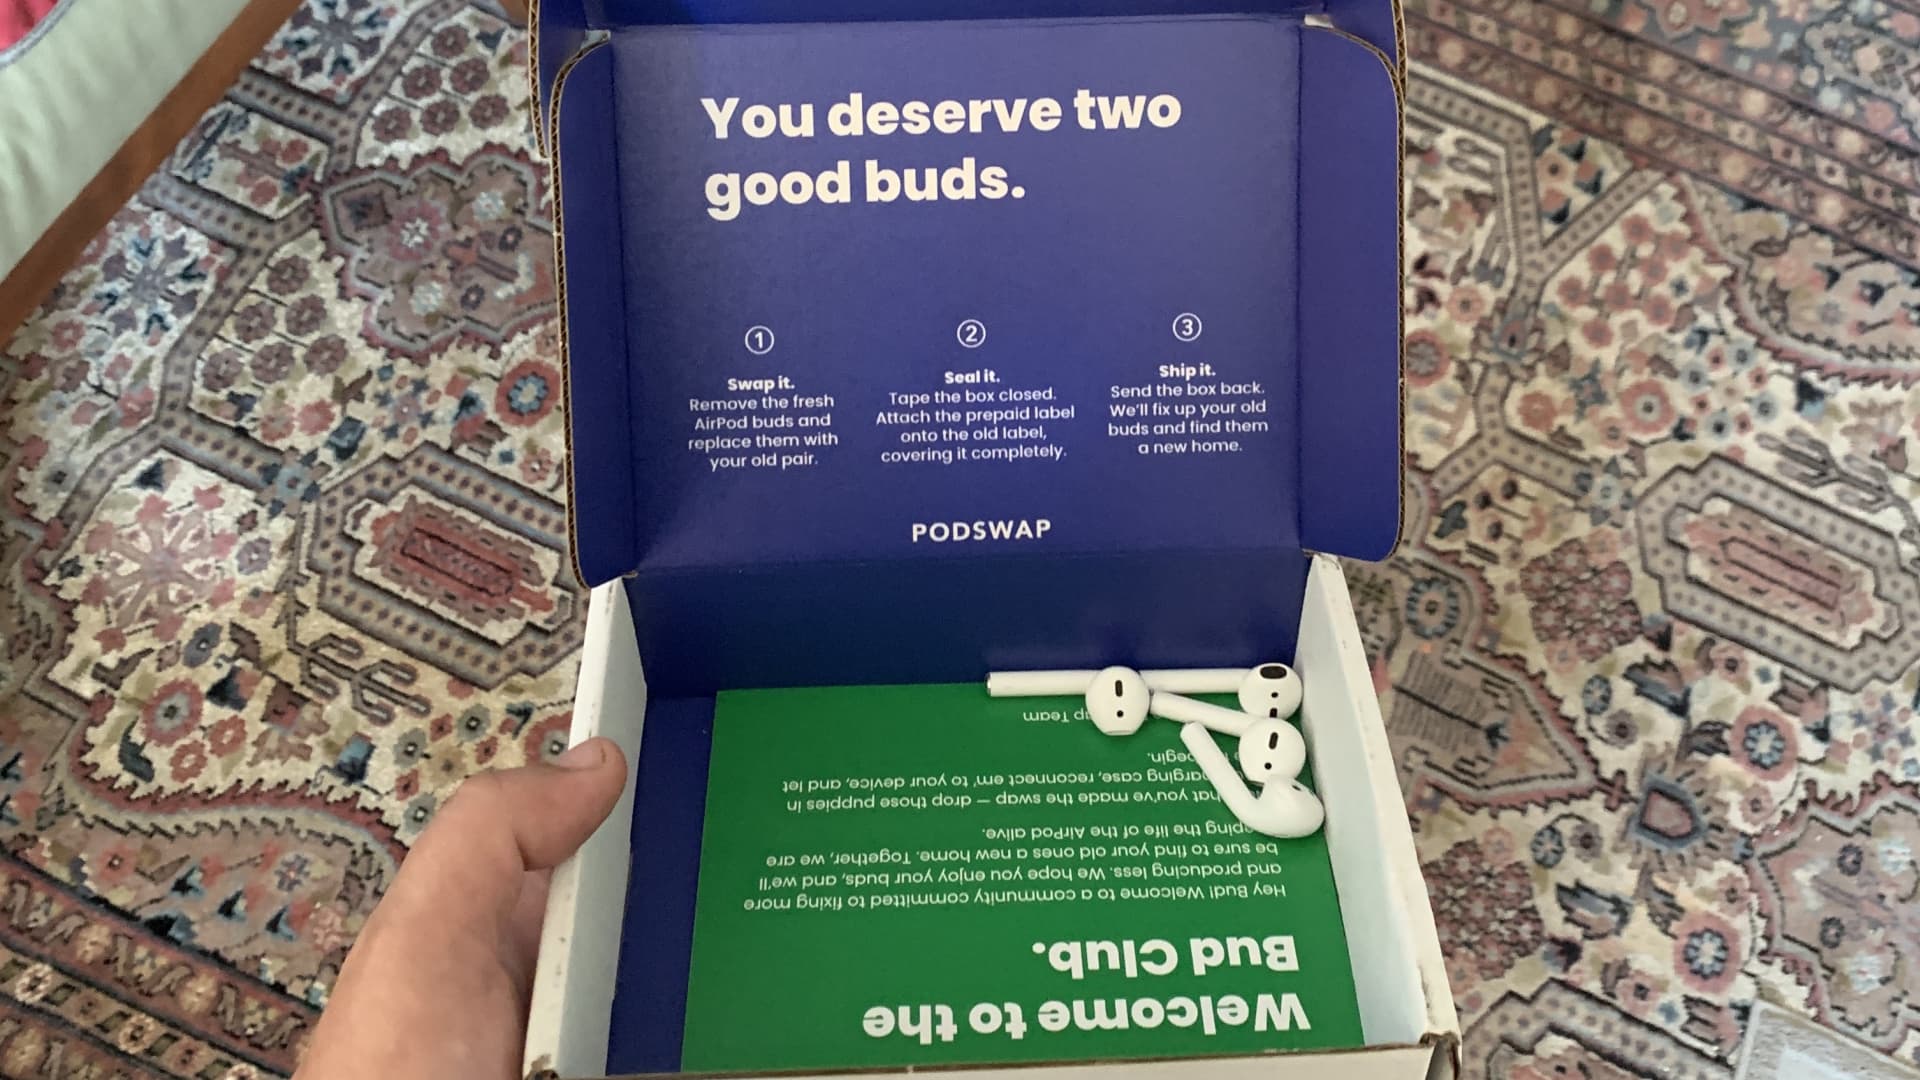 PodSwap includes a box to send old AirPods back.